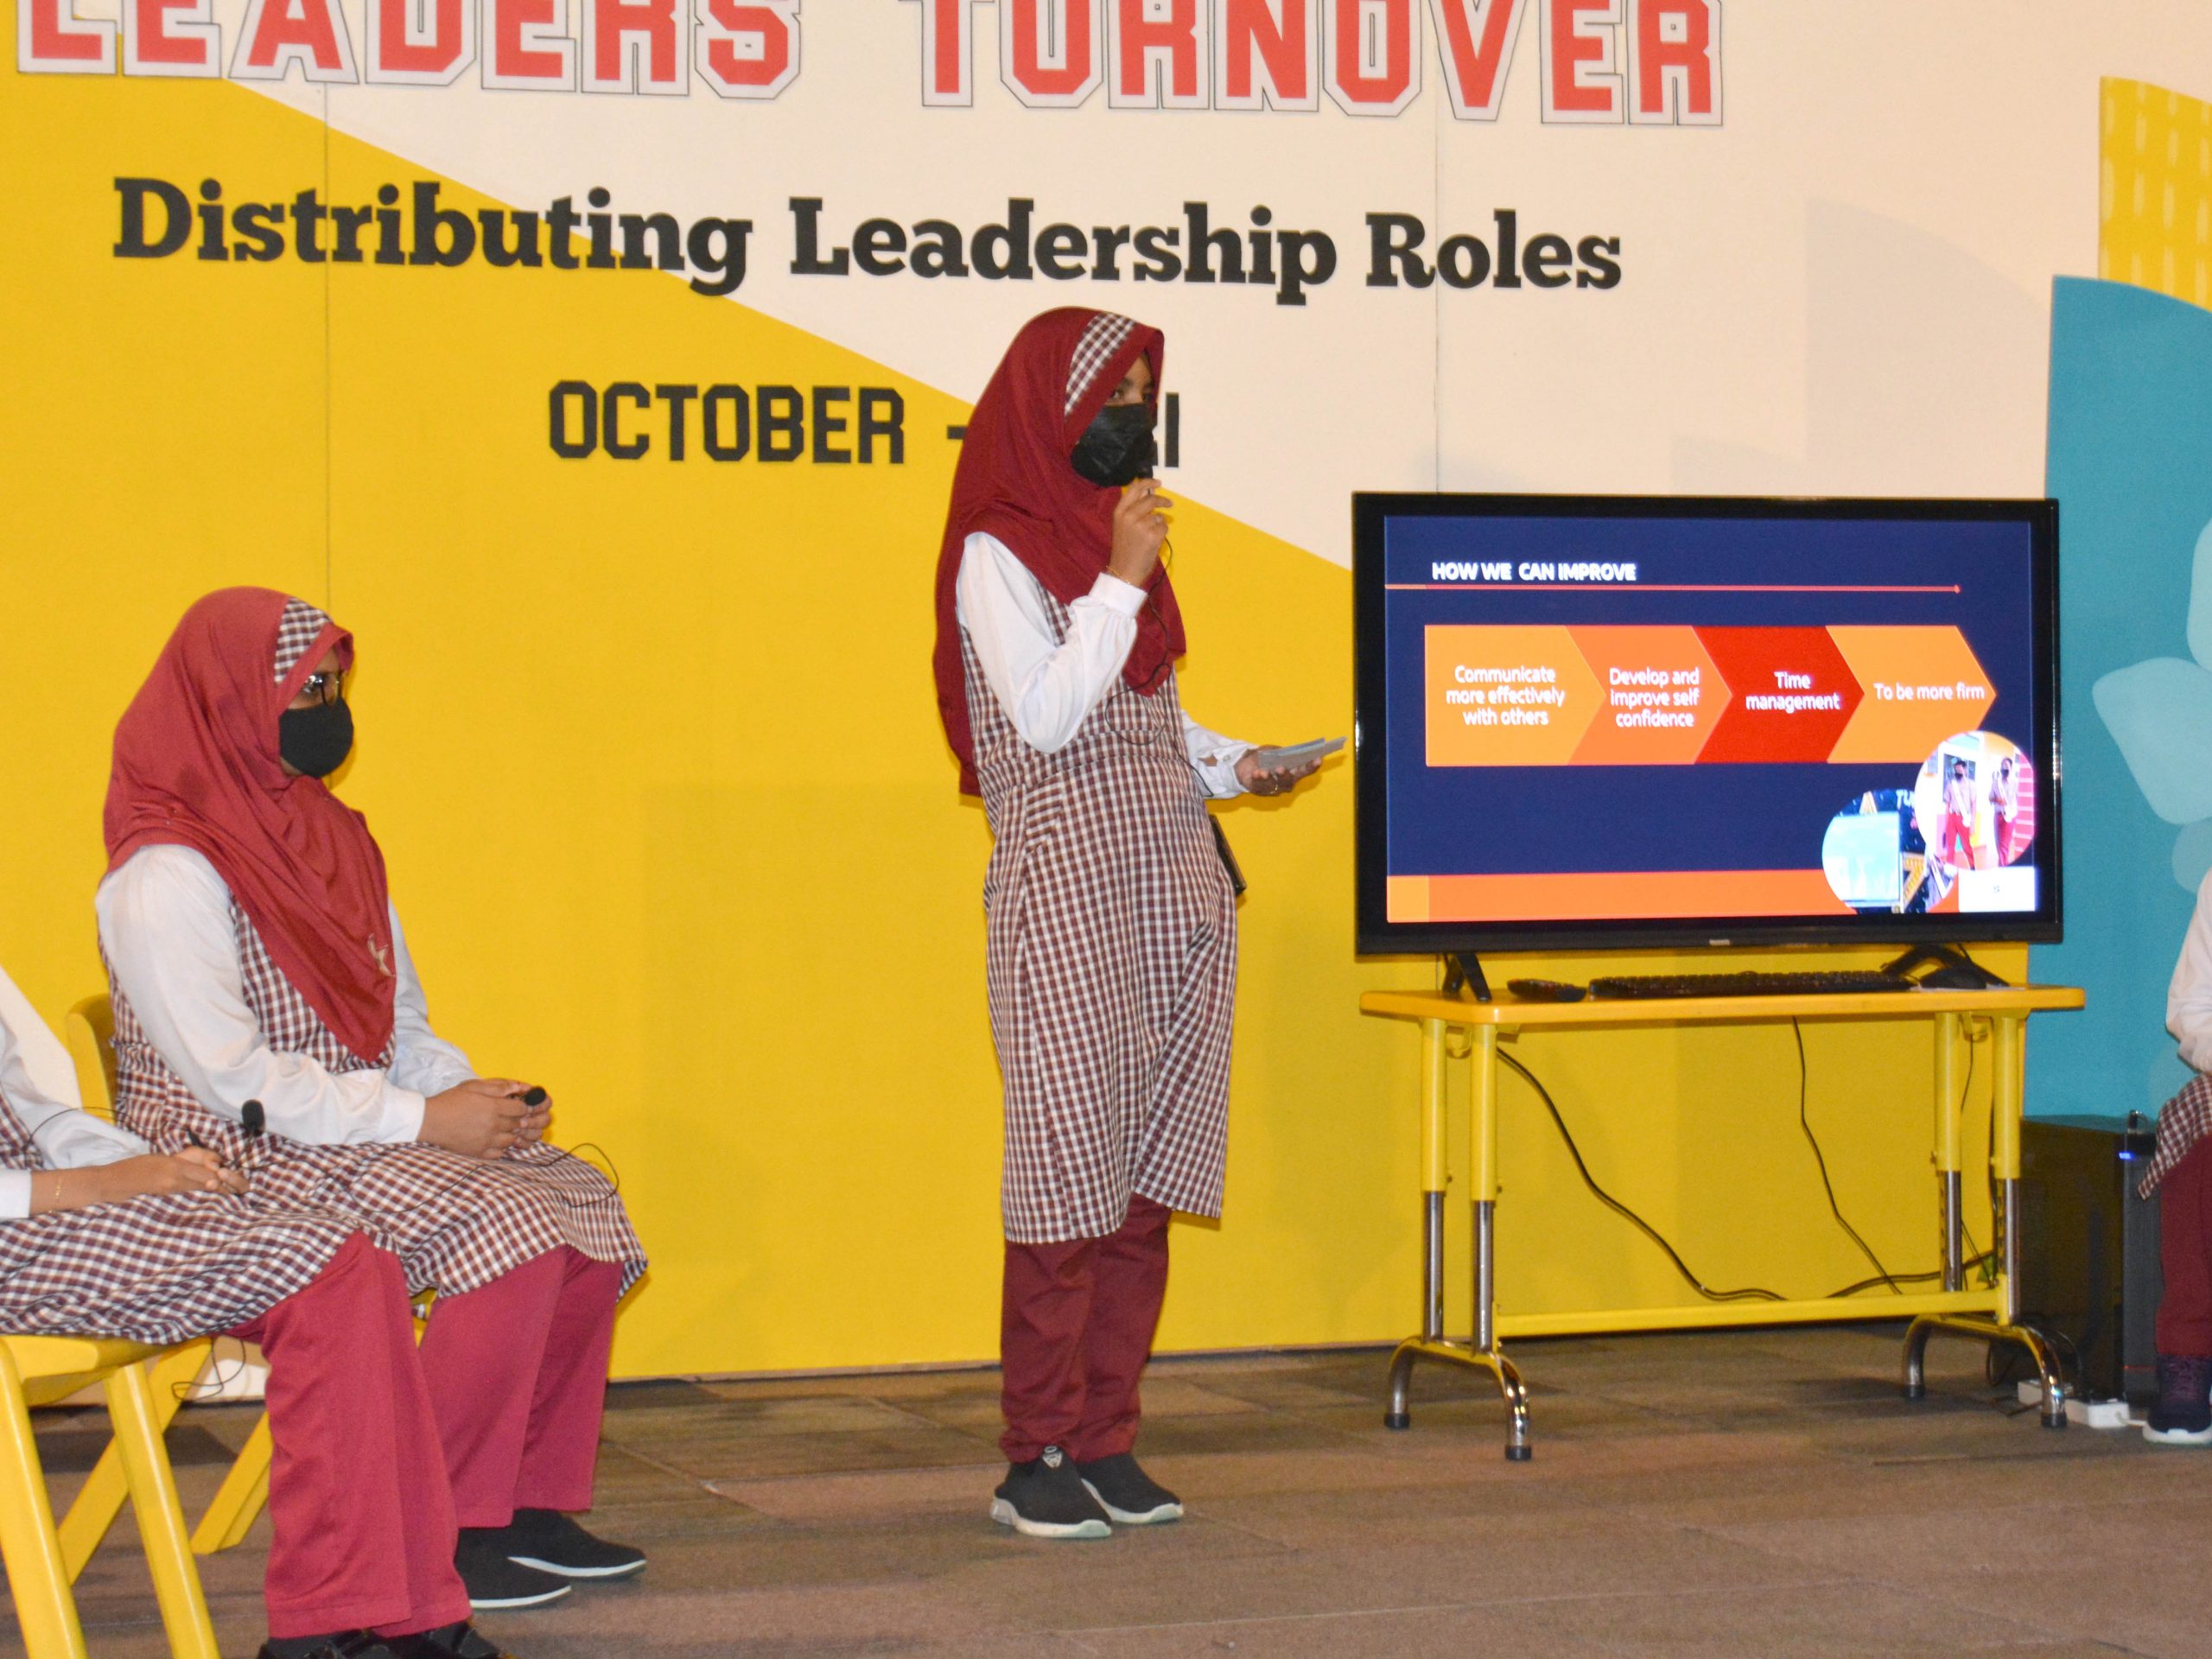 Leaders’ Turnover and Leadership Distribution Ceremony October 2021